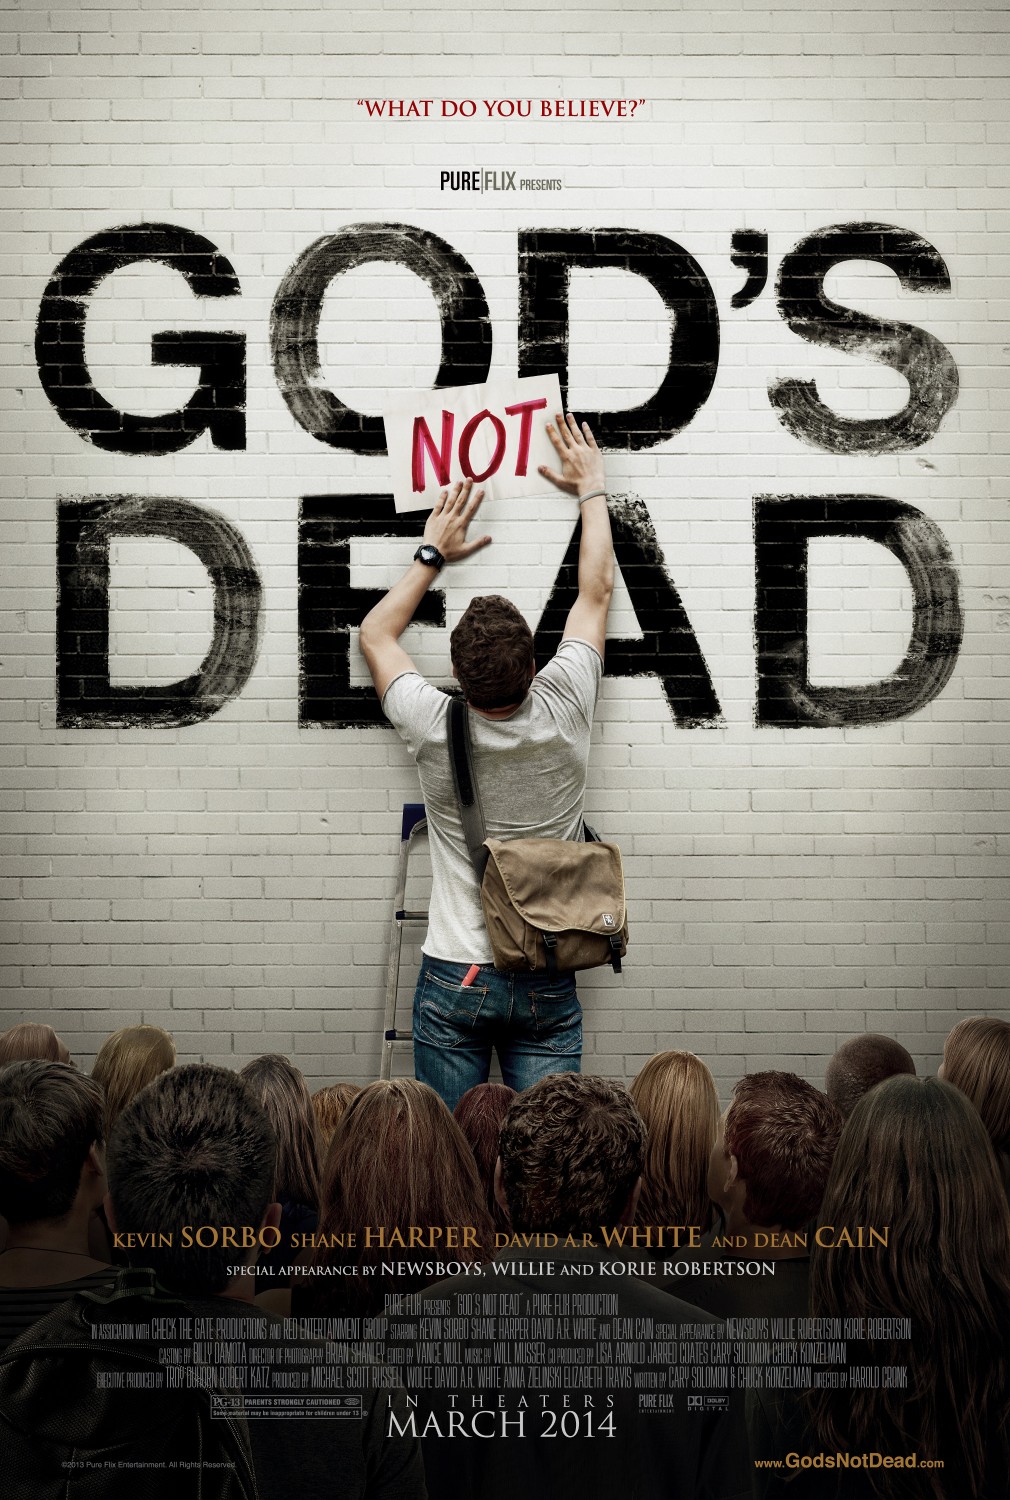 Extra Large Movie Poster Image for God's Not Dead 